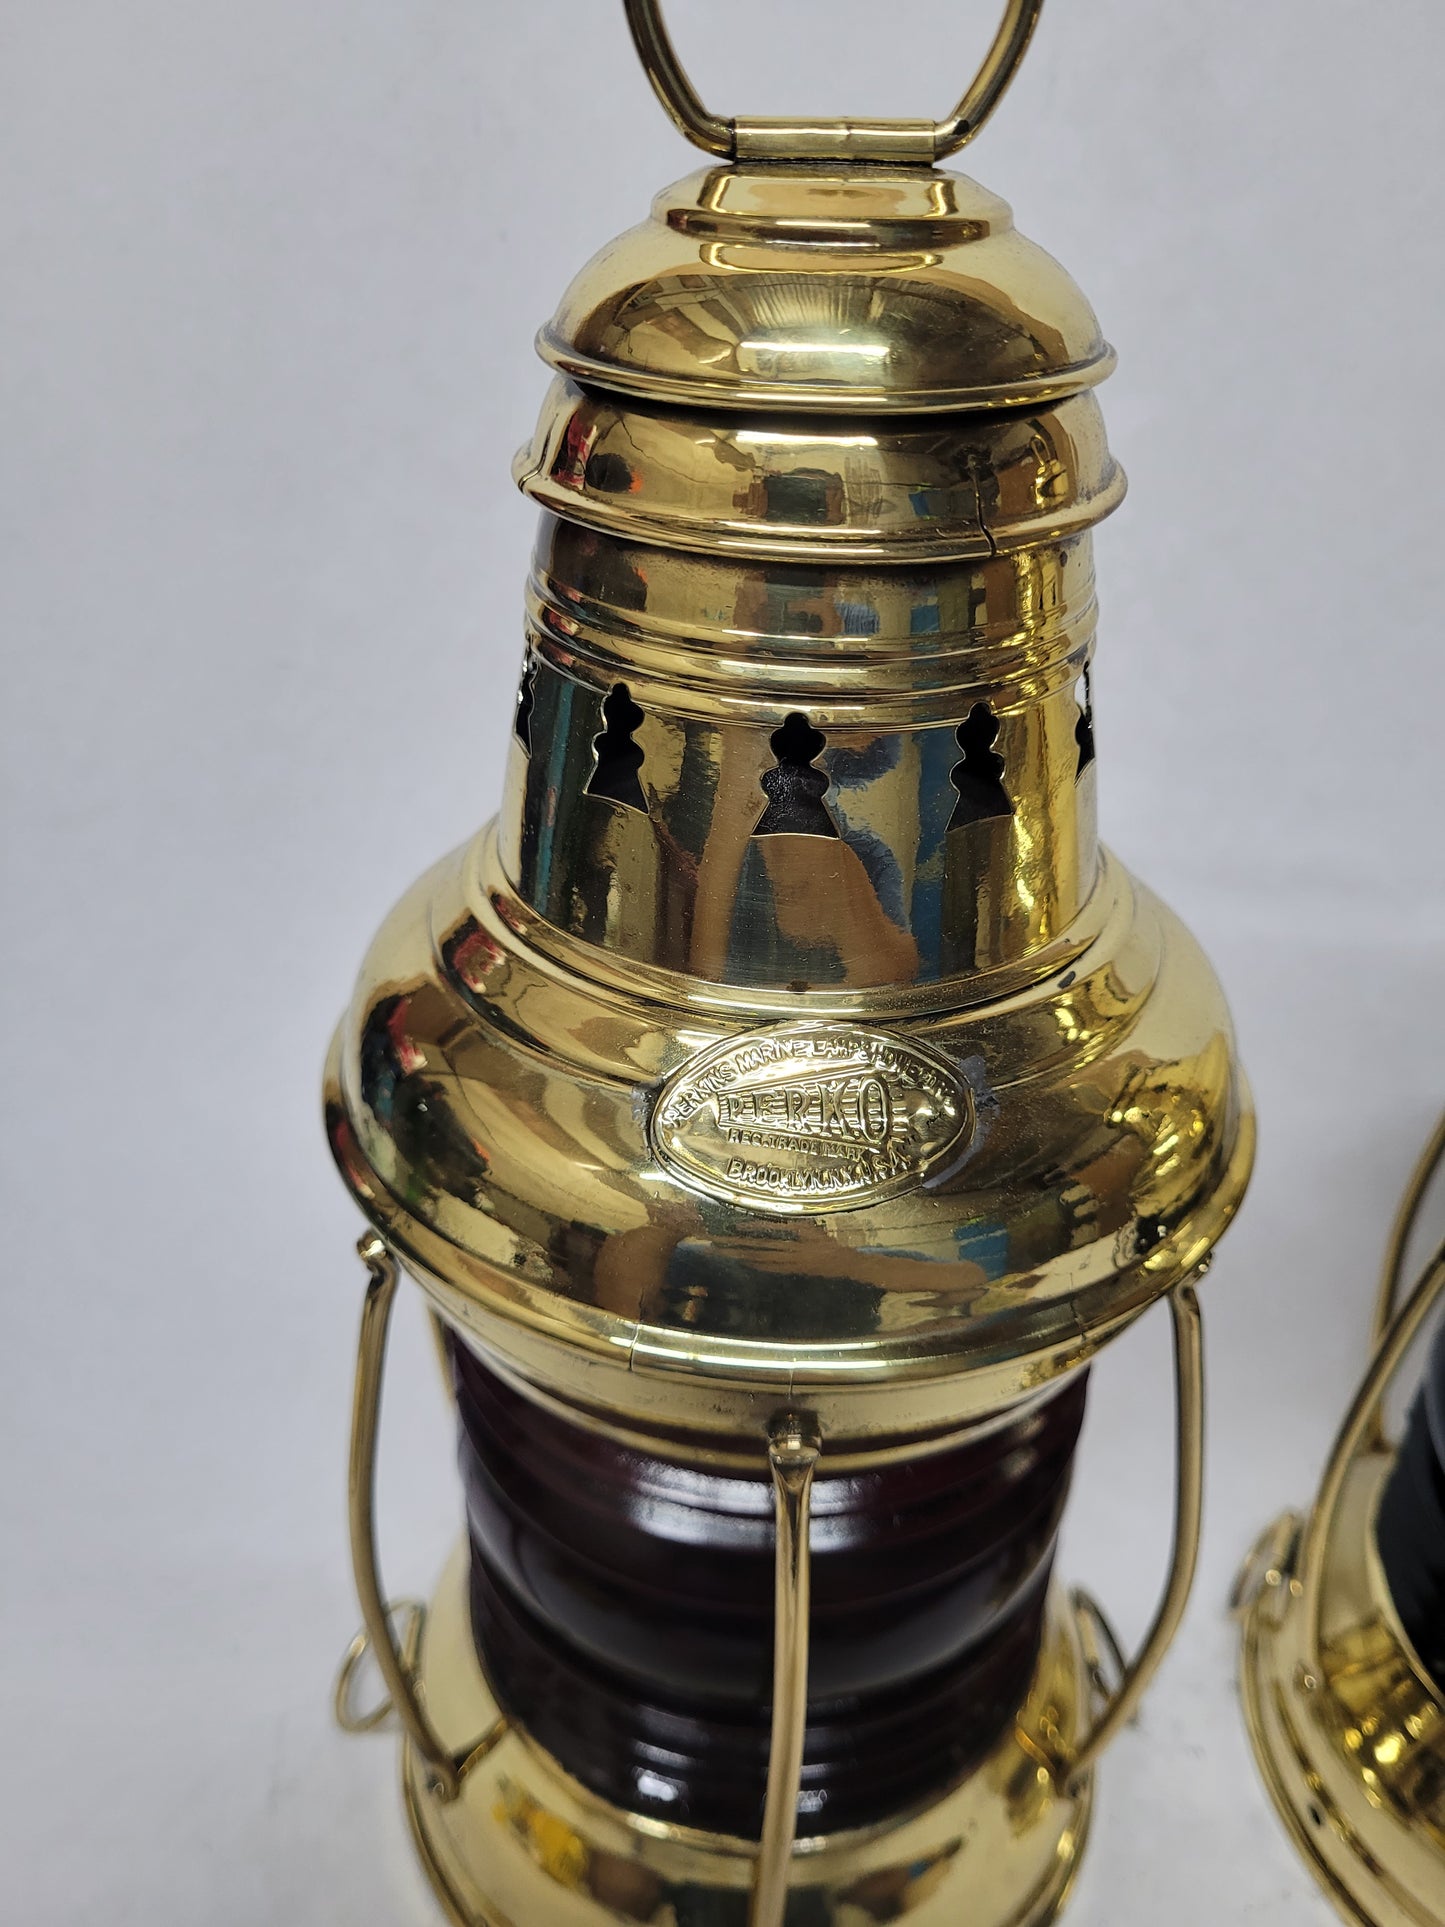 Exceptional Pair of Solid Brass Ships Lanterns